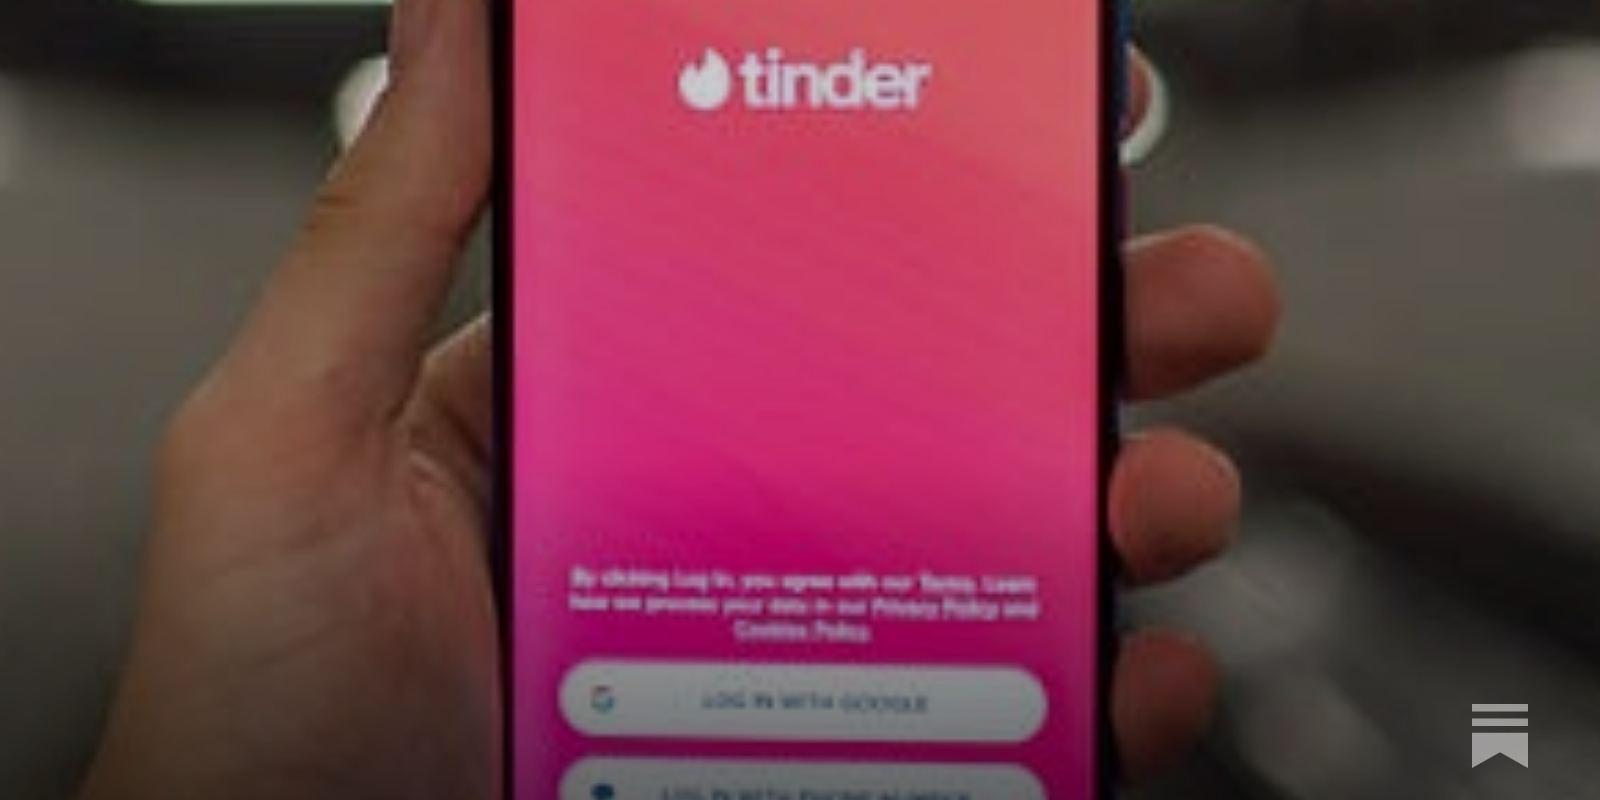 Tinder to ban web developers who use 'engineer' in their bio